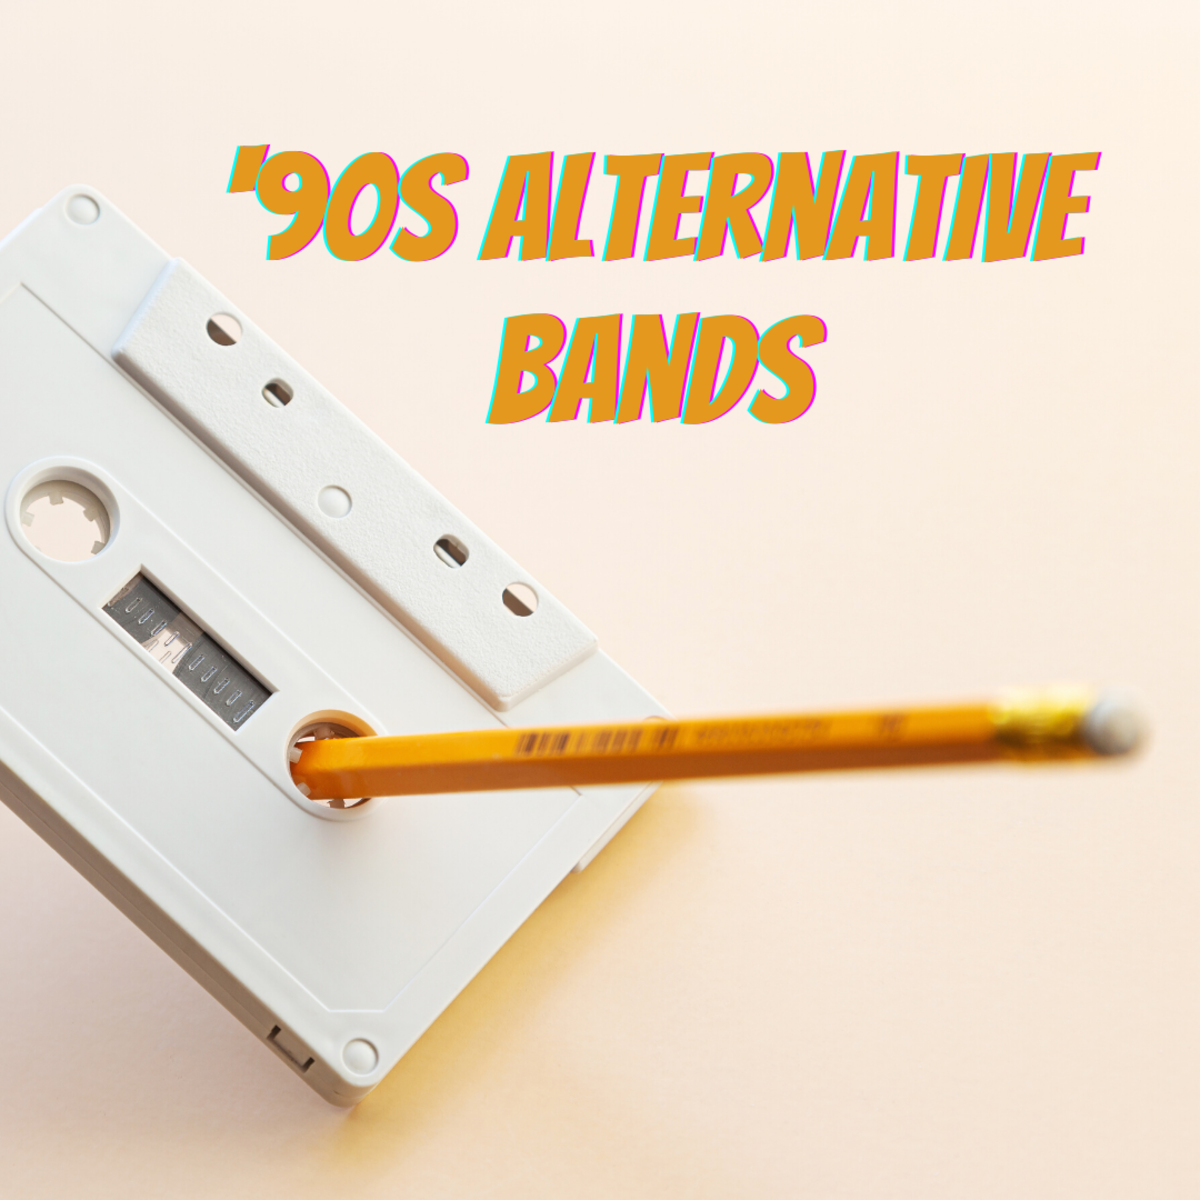 10 Awesome '90s Alternative Bands You May Not Know About